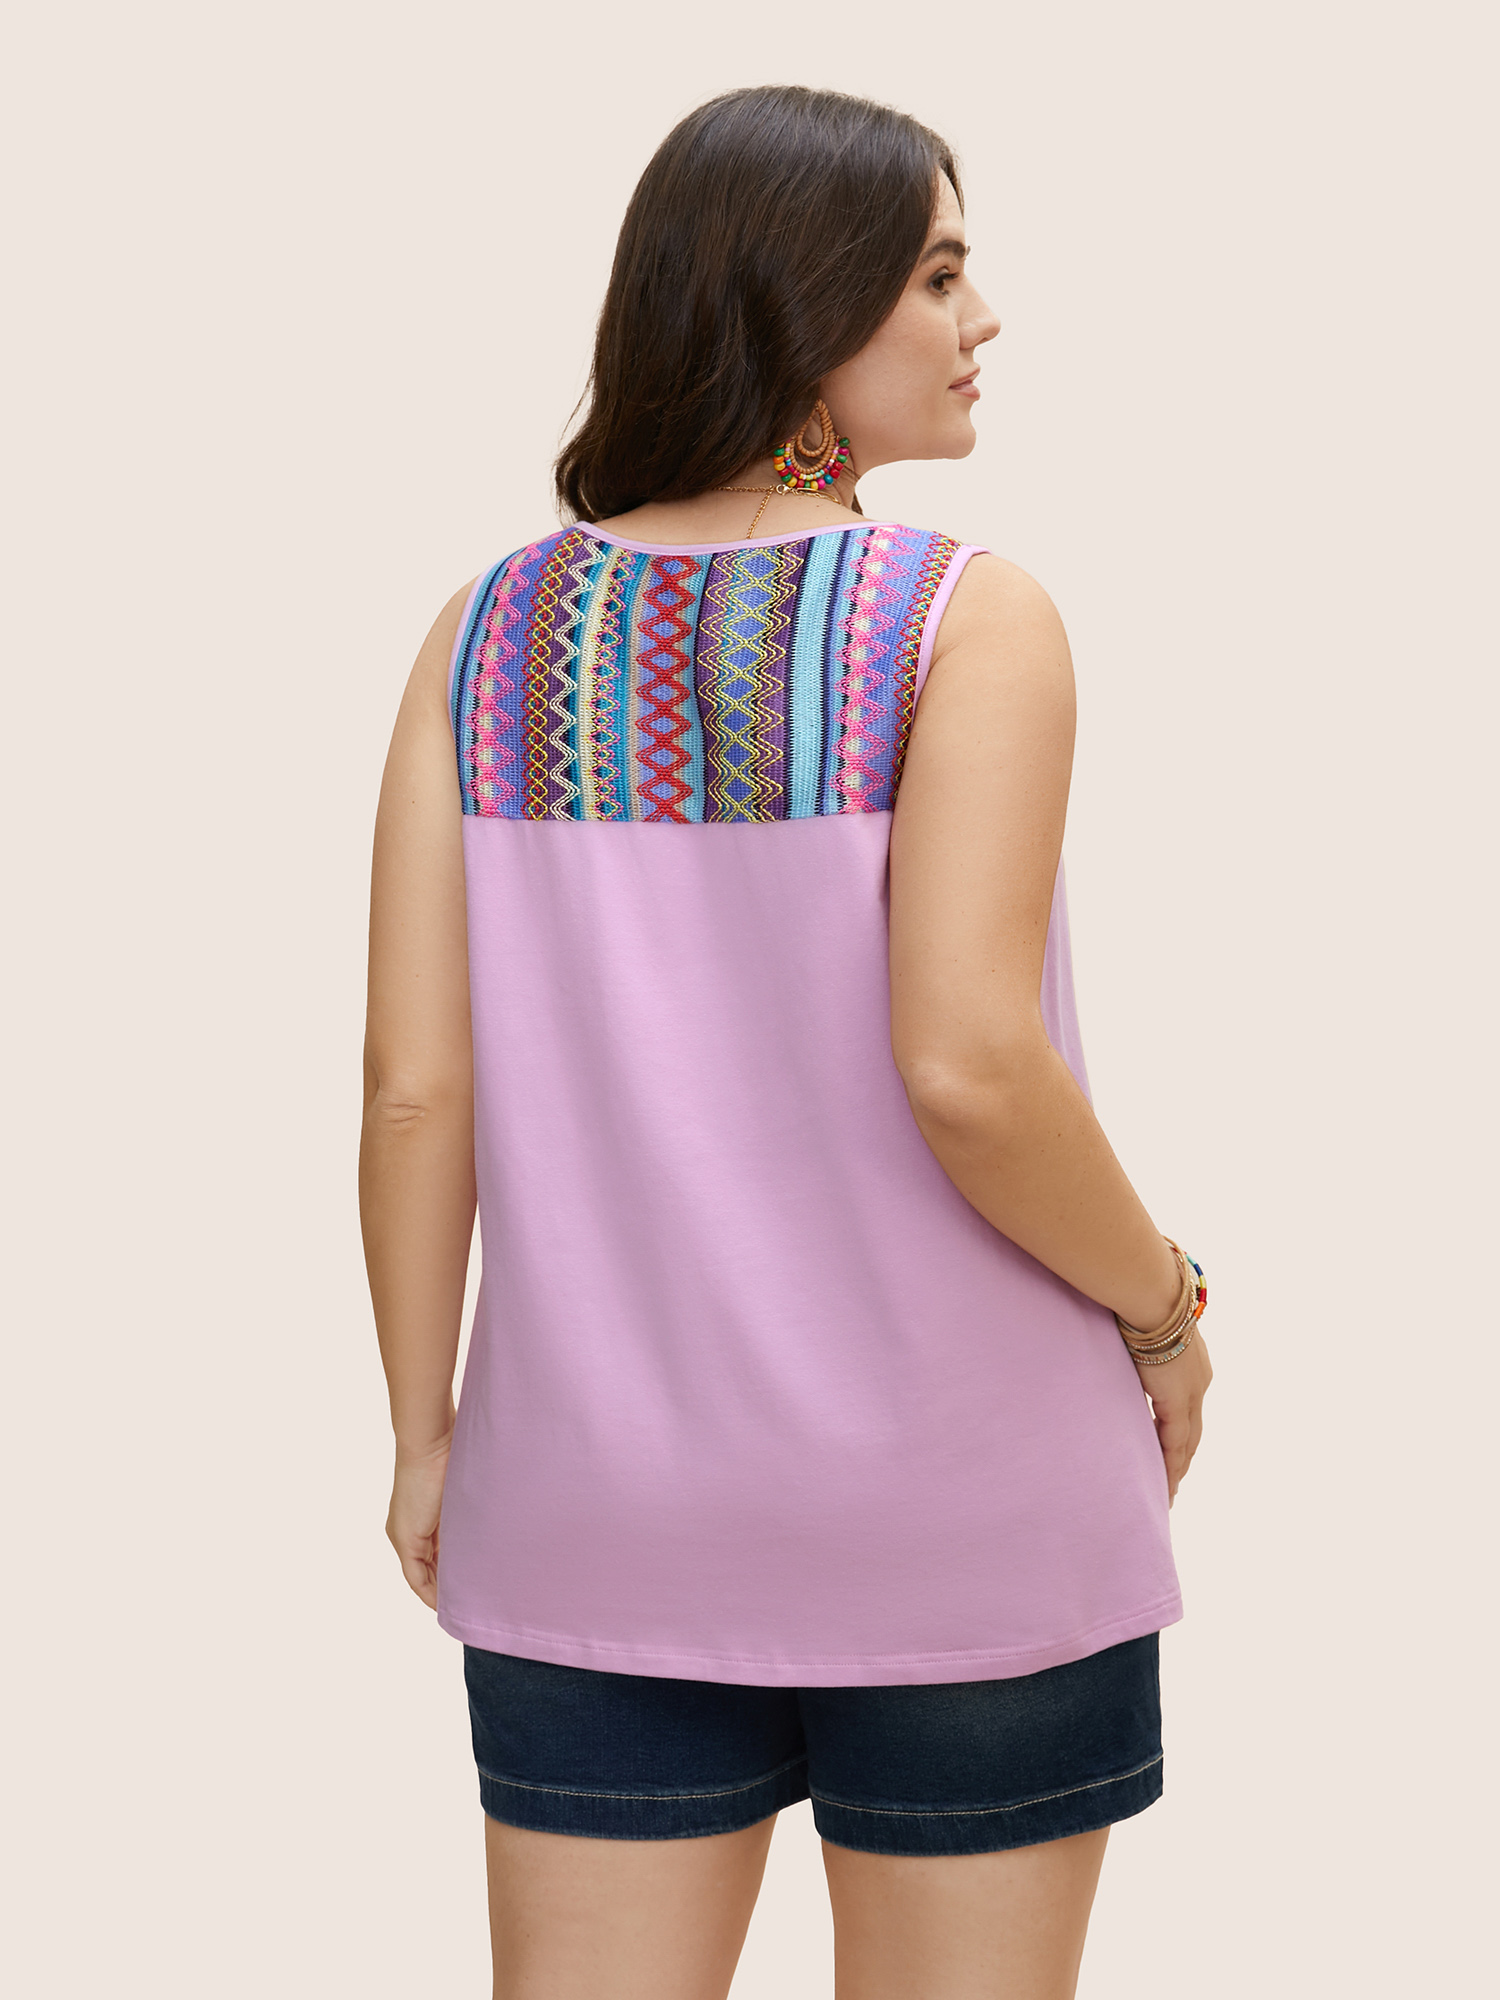 

Plus Size Round Neck Bandana Contrast Patchwork Tank Top Women Lilac Resort Contrast Round Neck Vacation Tank Tops Camis BloomChic